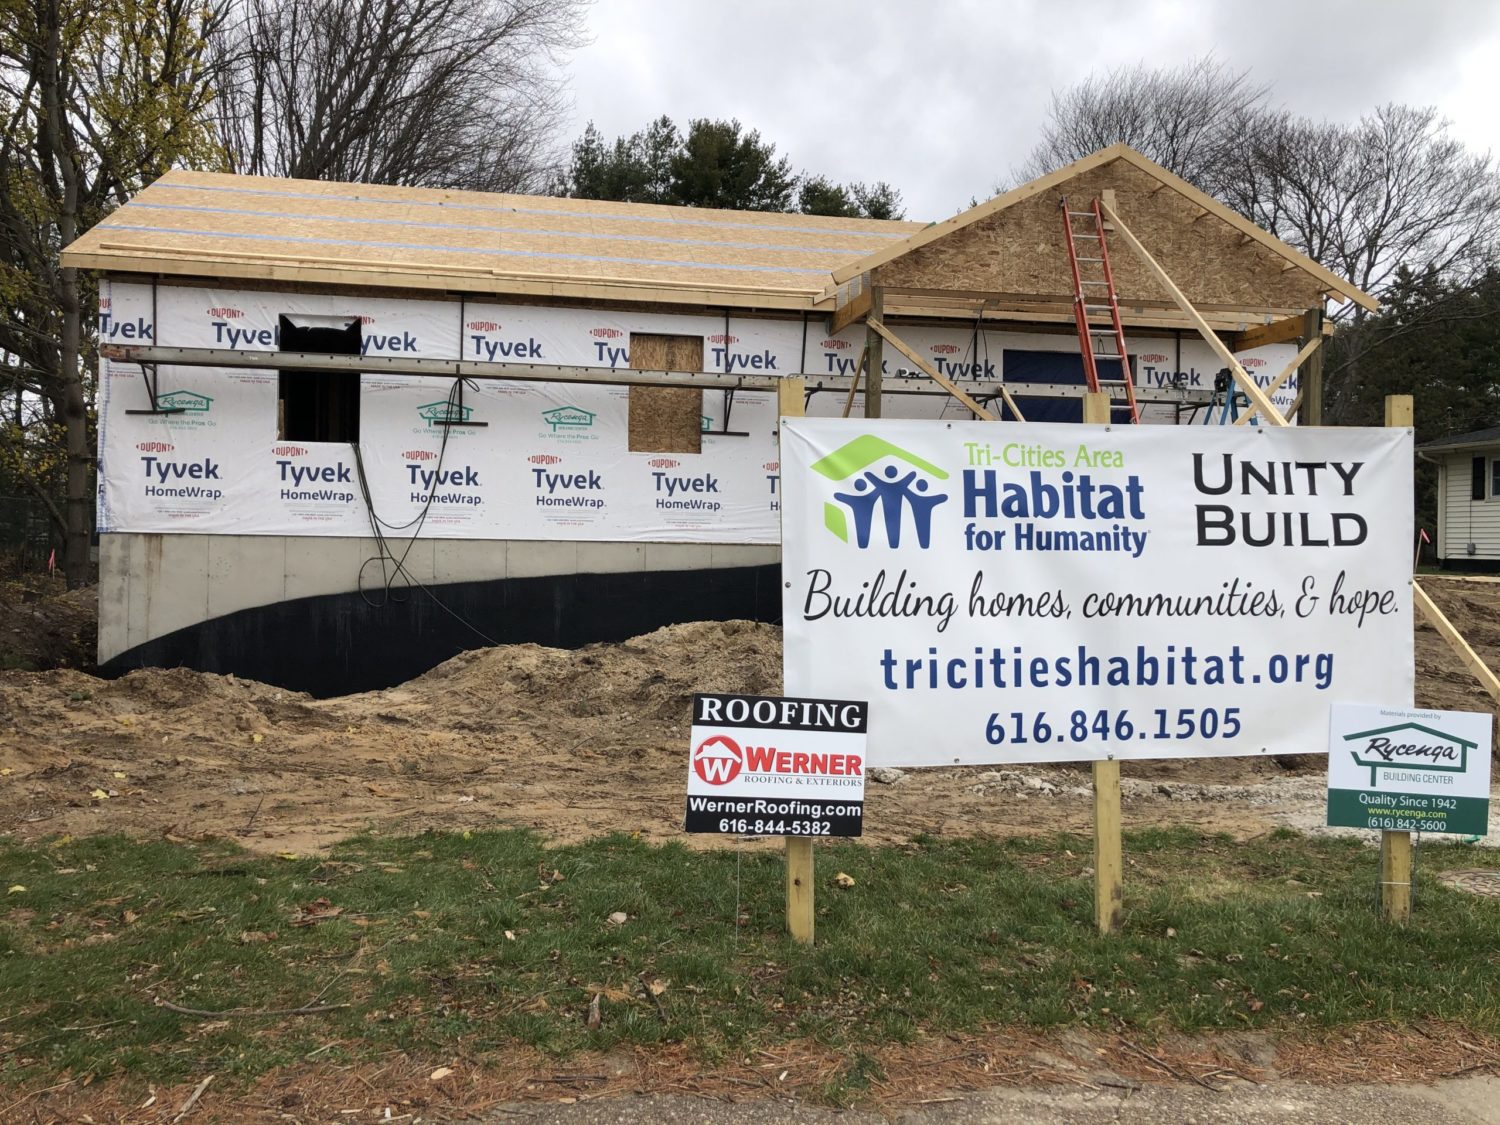 Habitat for humanity and Werner Roofing